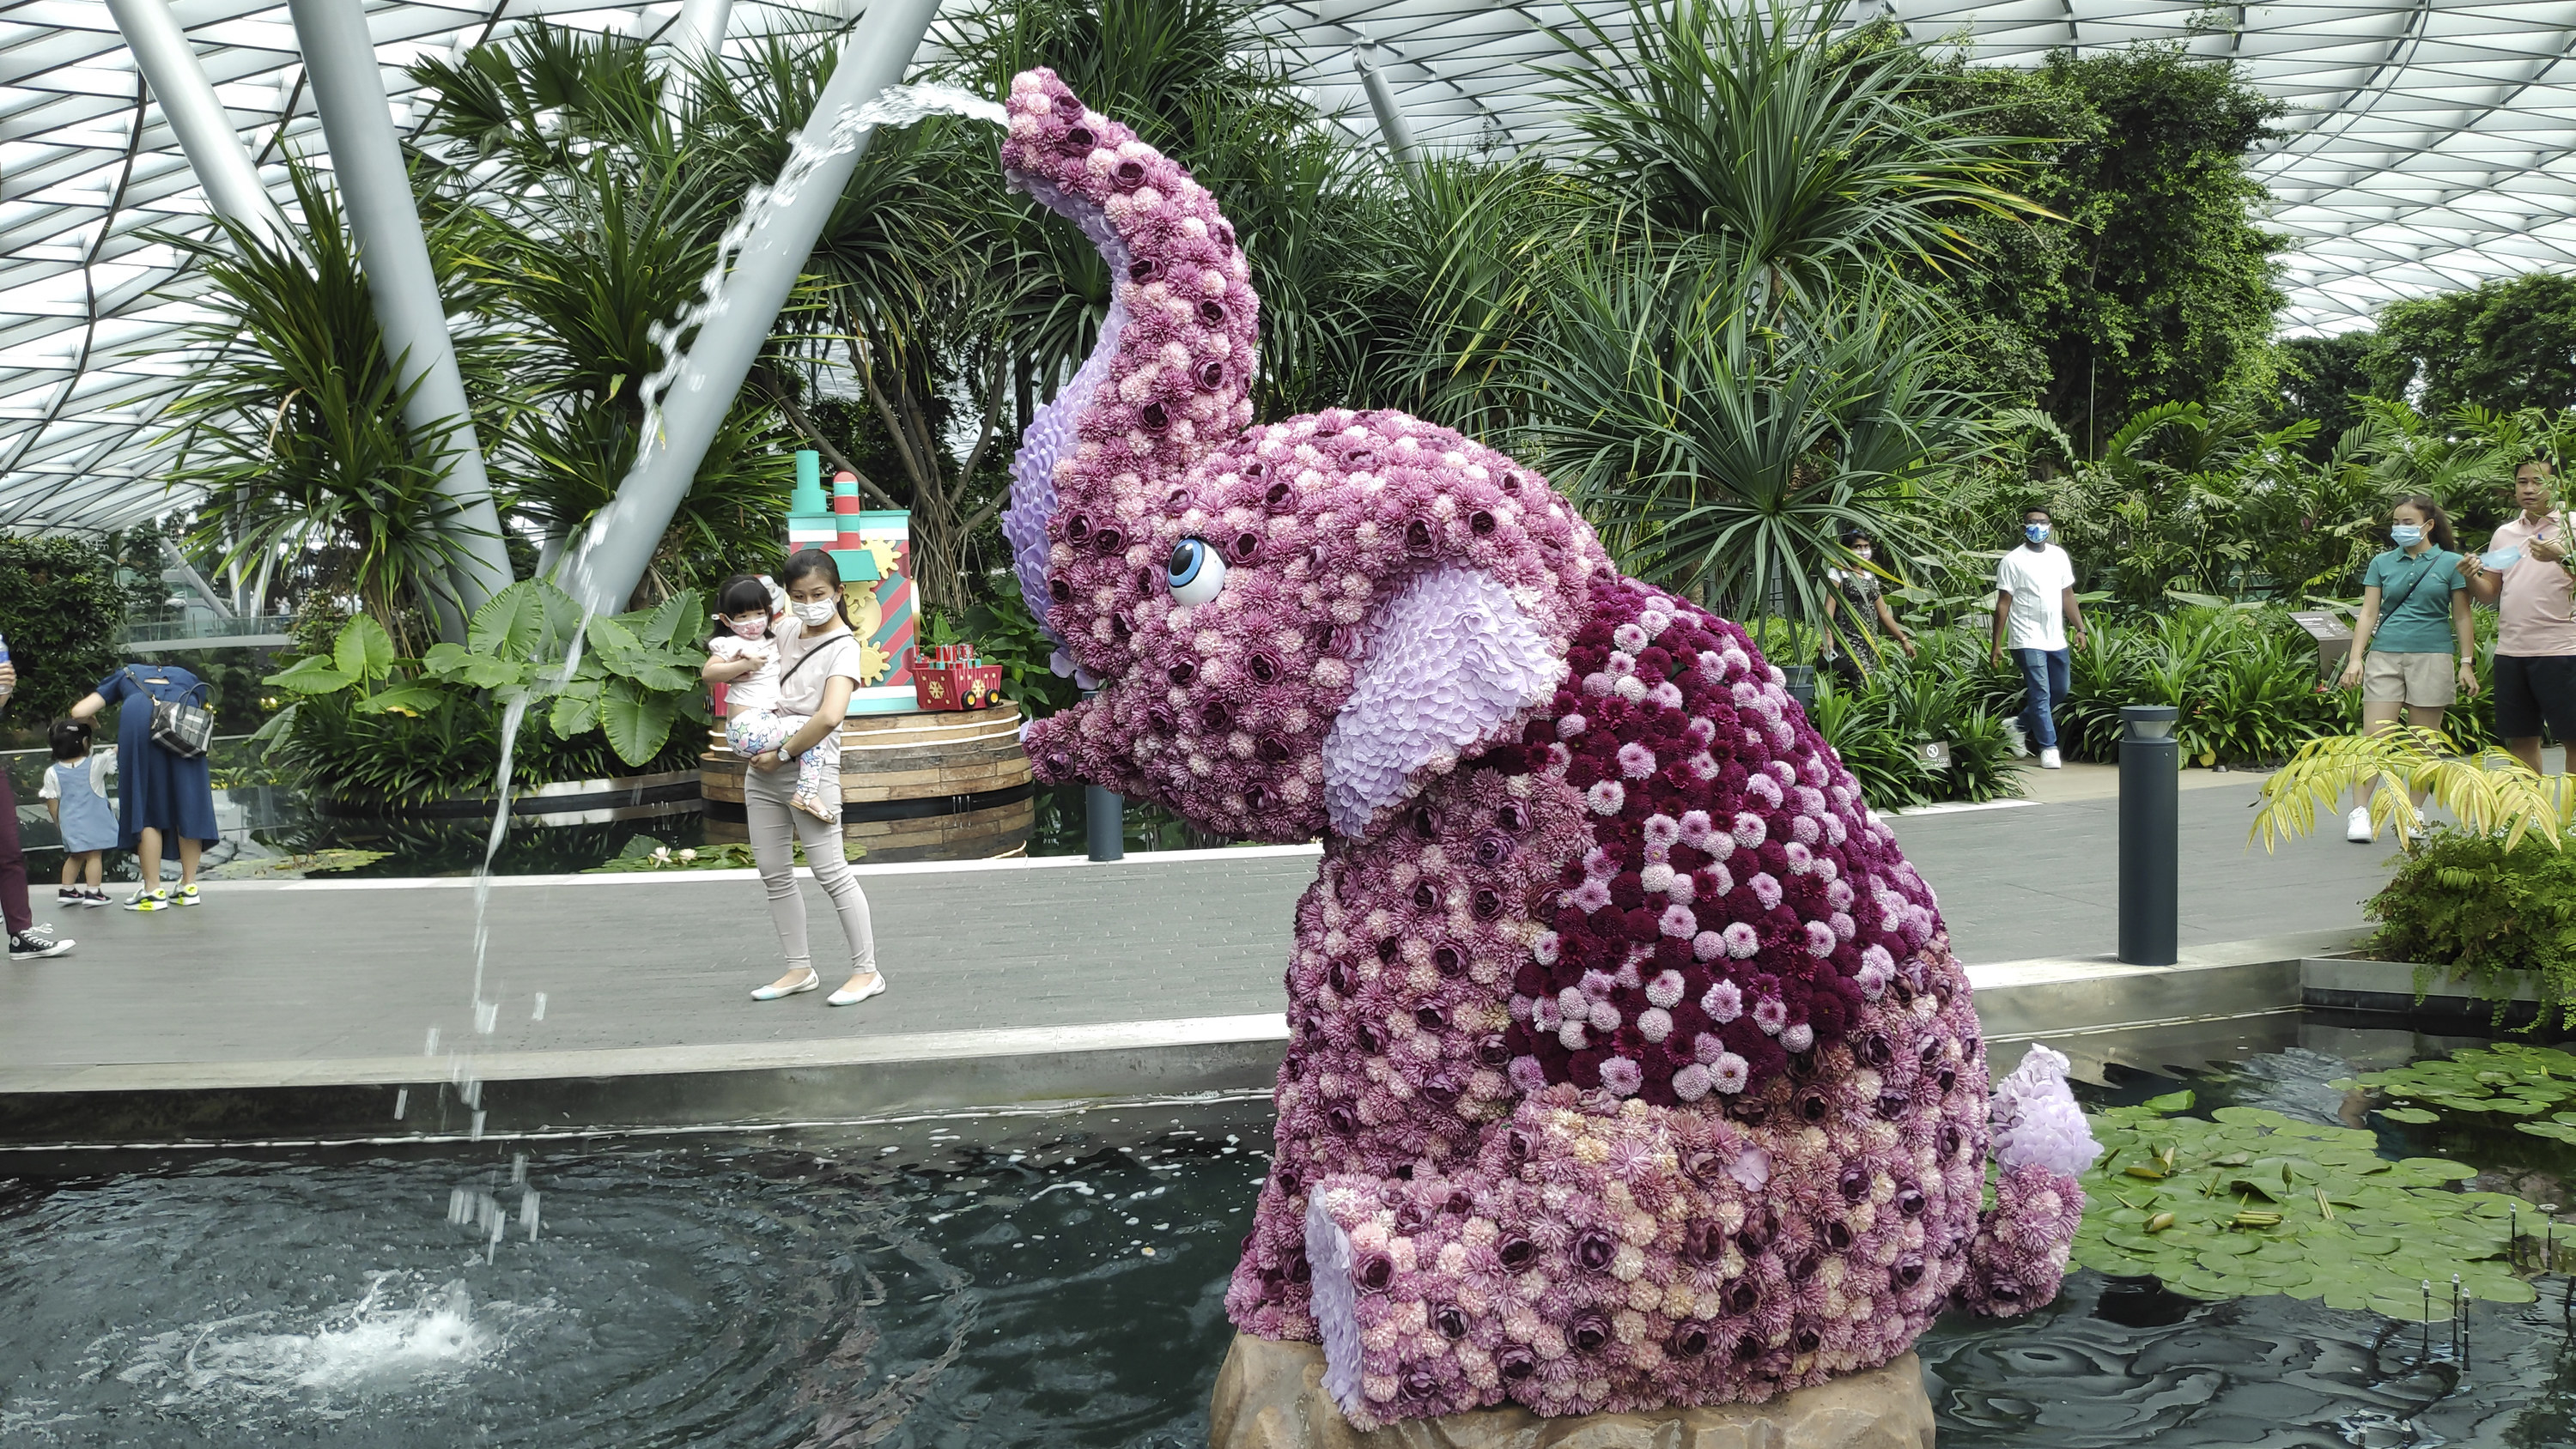 Floral elephant fountain in the Topiary walk at Canopy Park